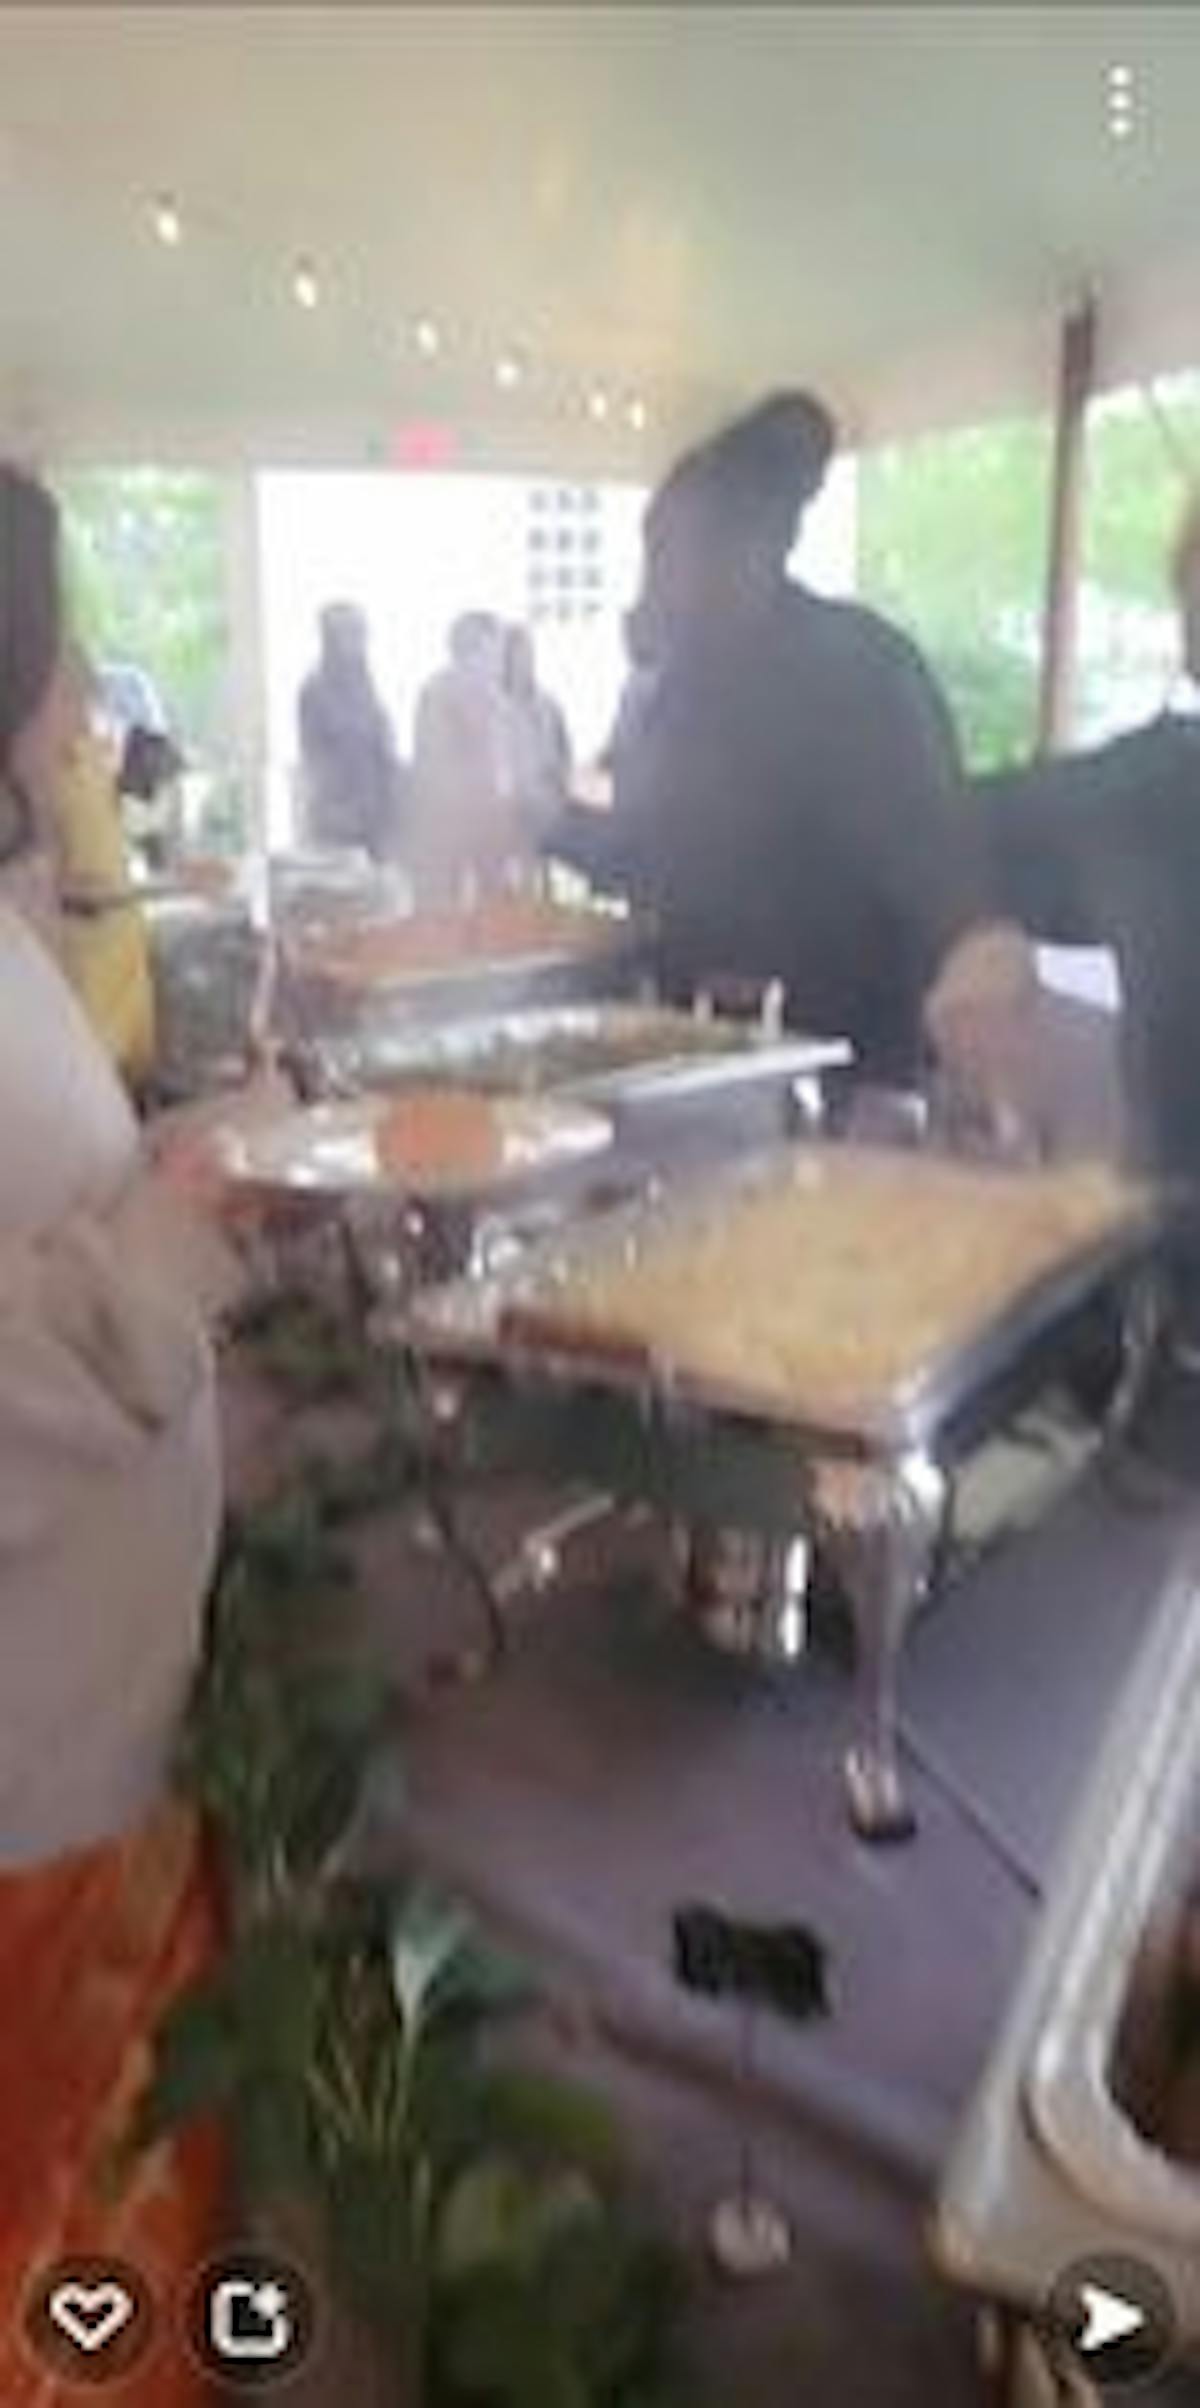 Roasted Chicken, Hot Rolls, Homemade Mac & Cheese, Green Beans being Served by Servers